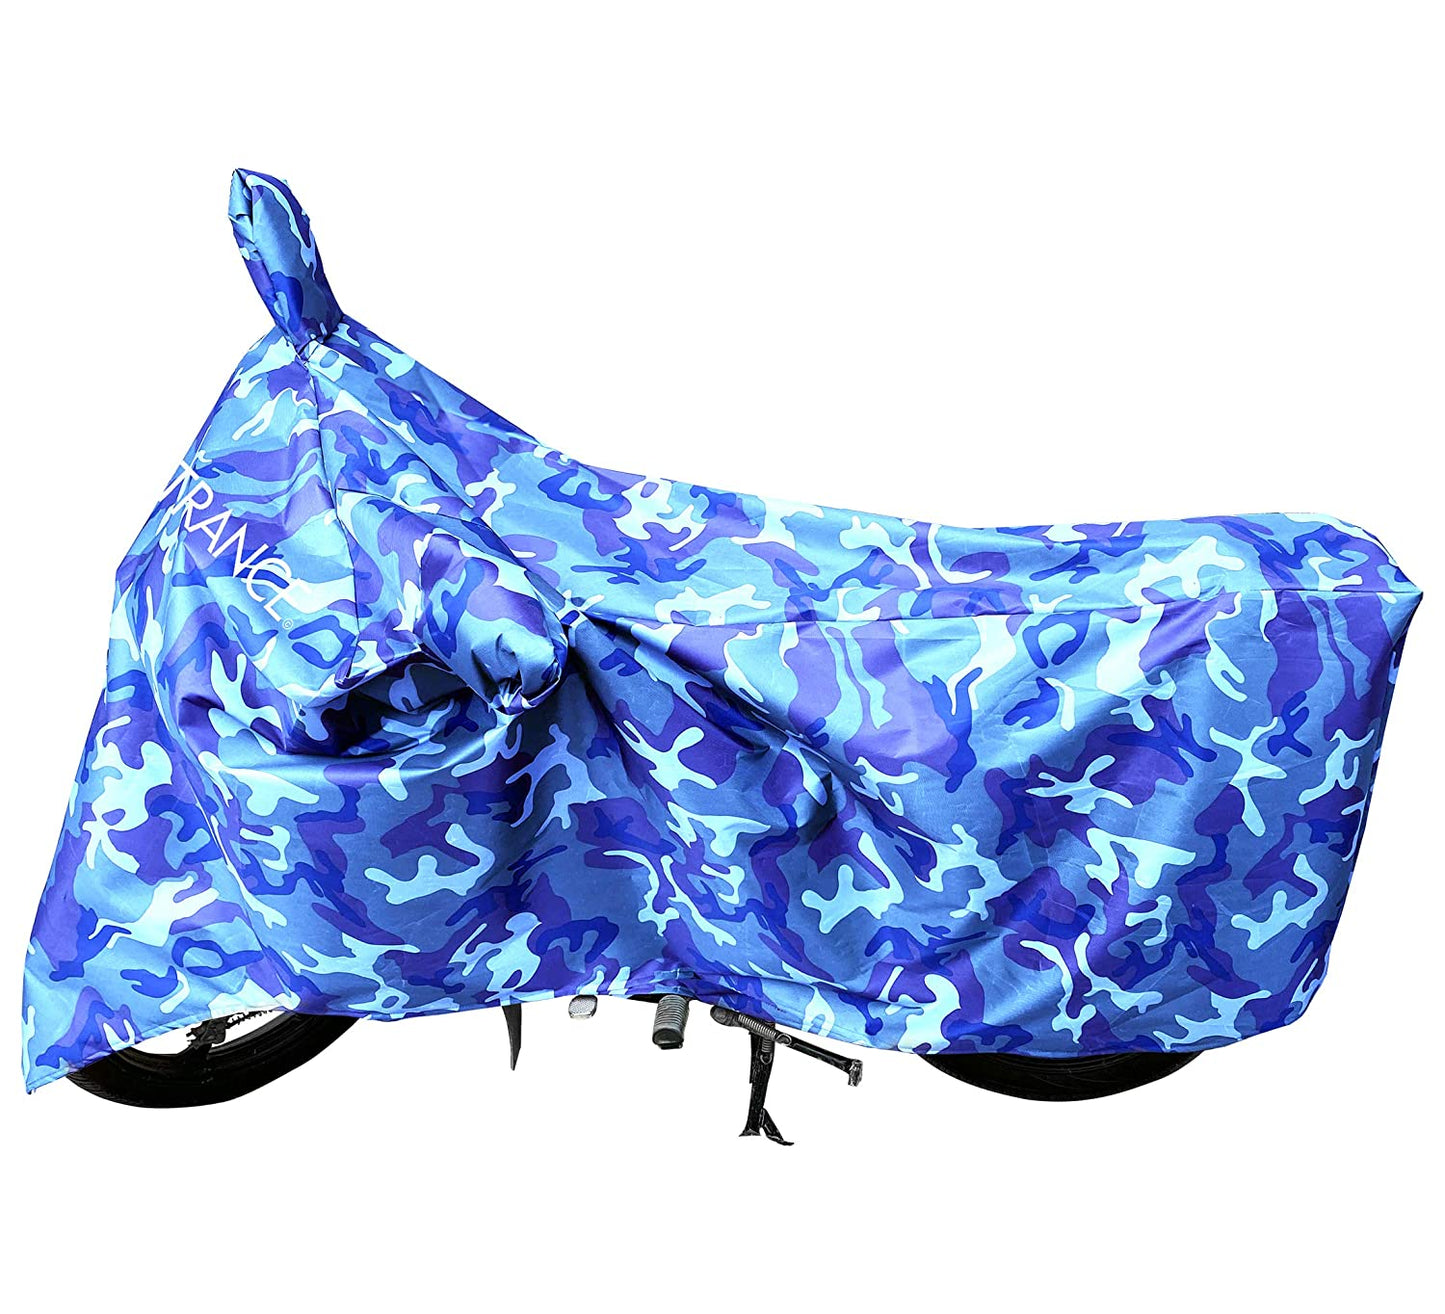 MotoTrance Jungle Bike Body Covers For LML Freedom DX - Interlock-Stitched Waterproof and Heat Resistant with Mirror Pockets